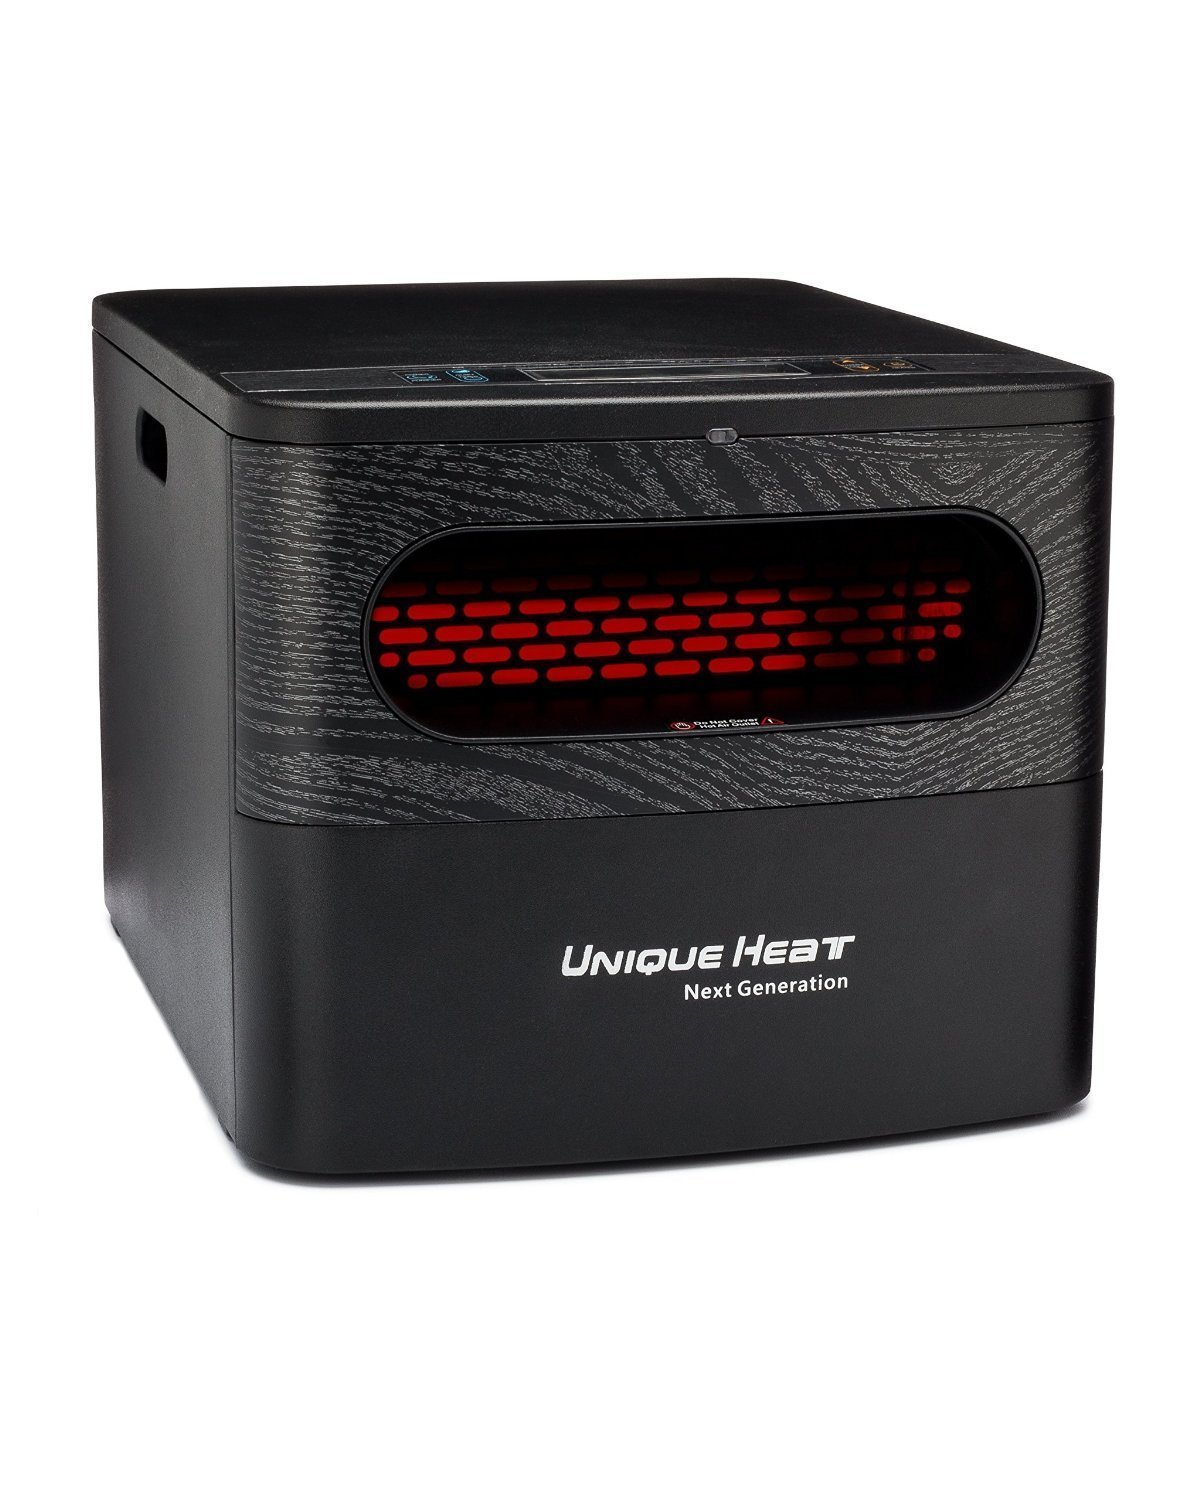 Best Infrared Heater review